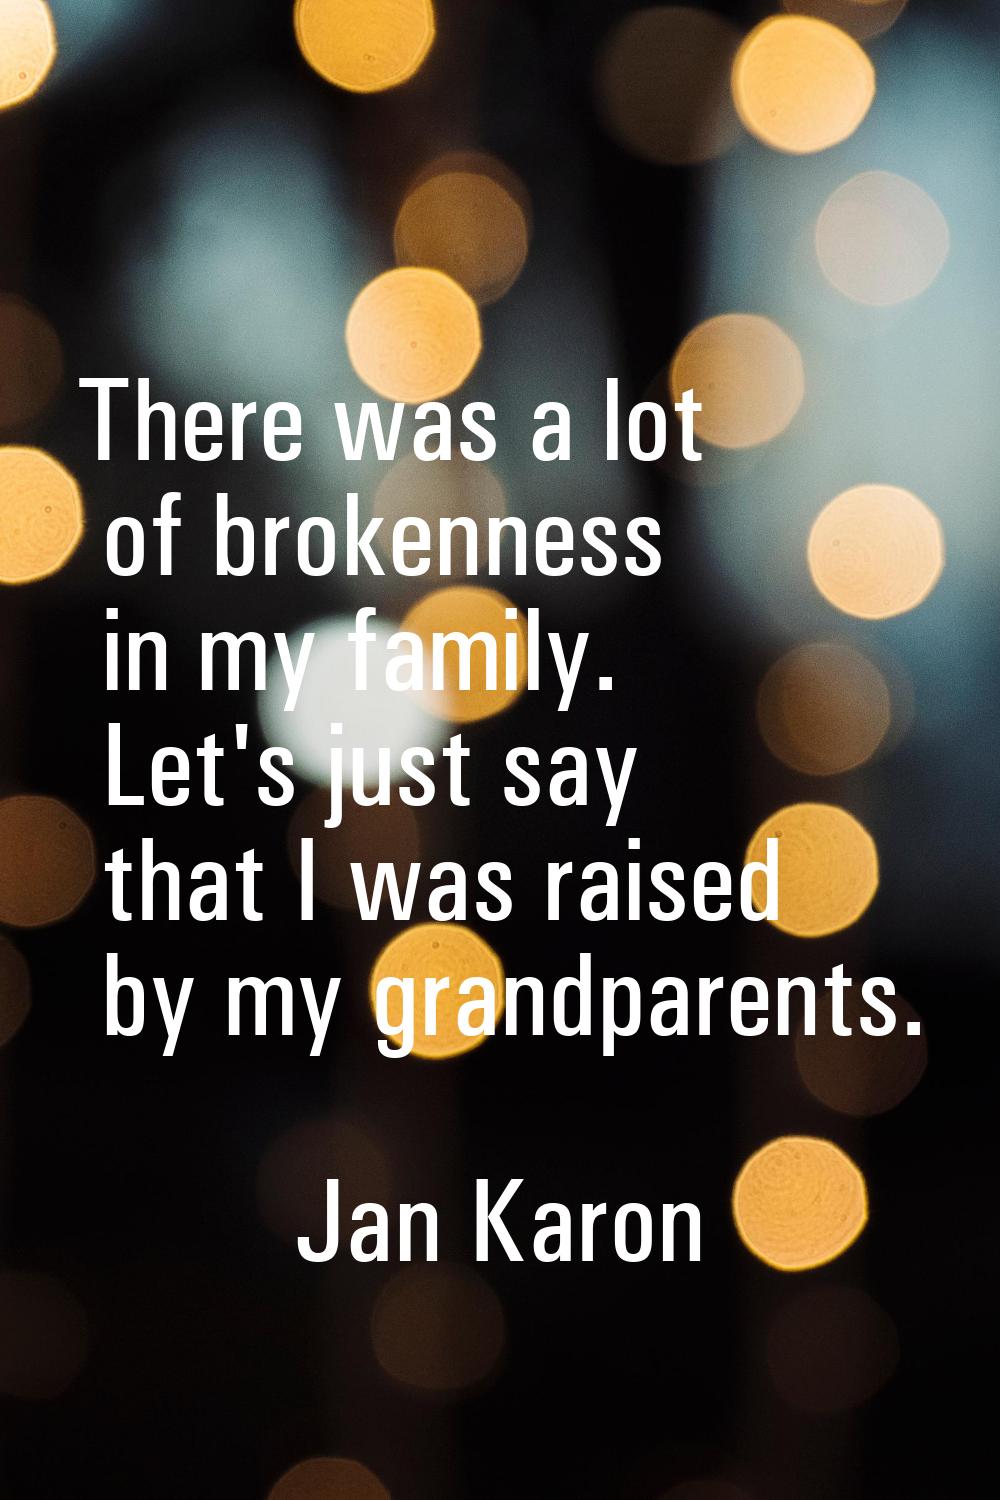 There was a lot of brokenness in my family. Let's just say that I was raised by my grandparents.